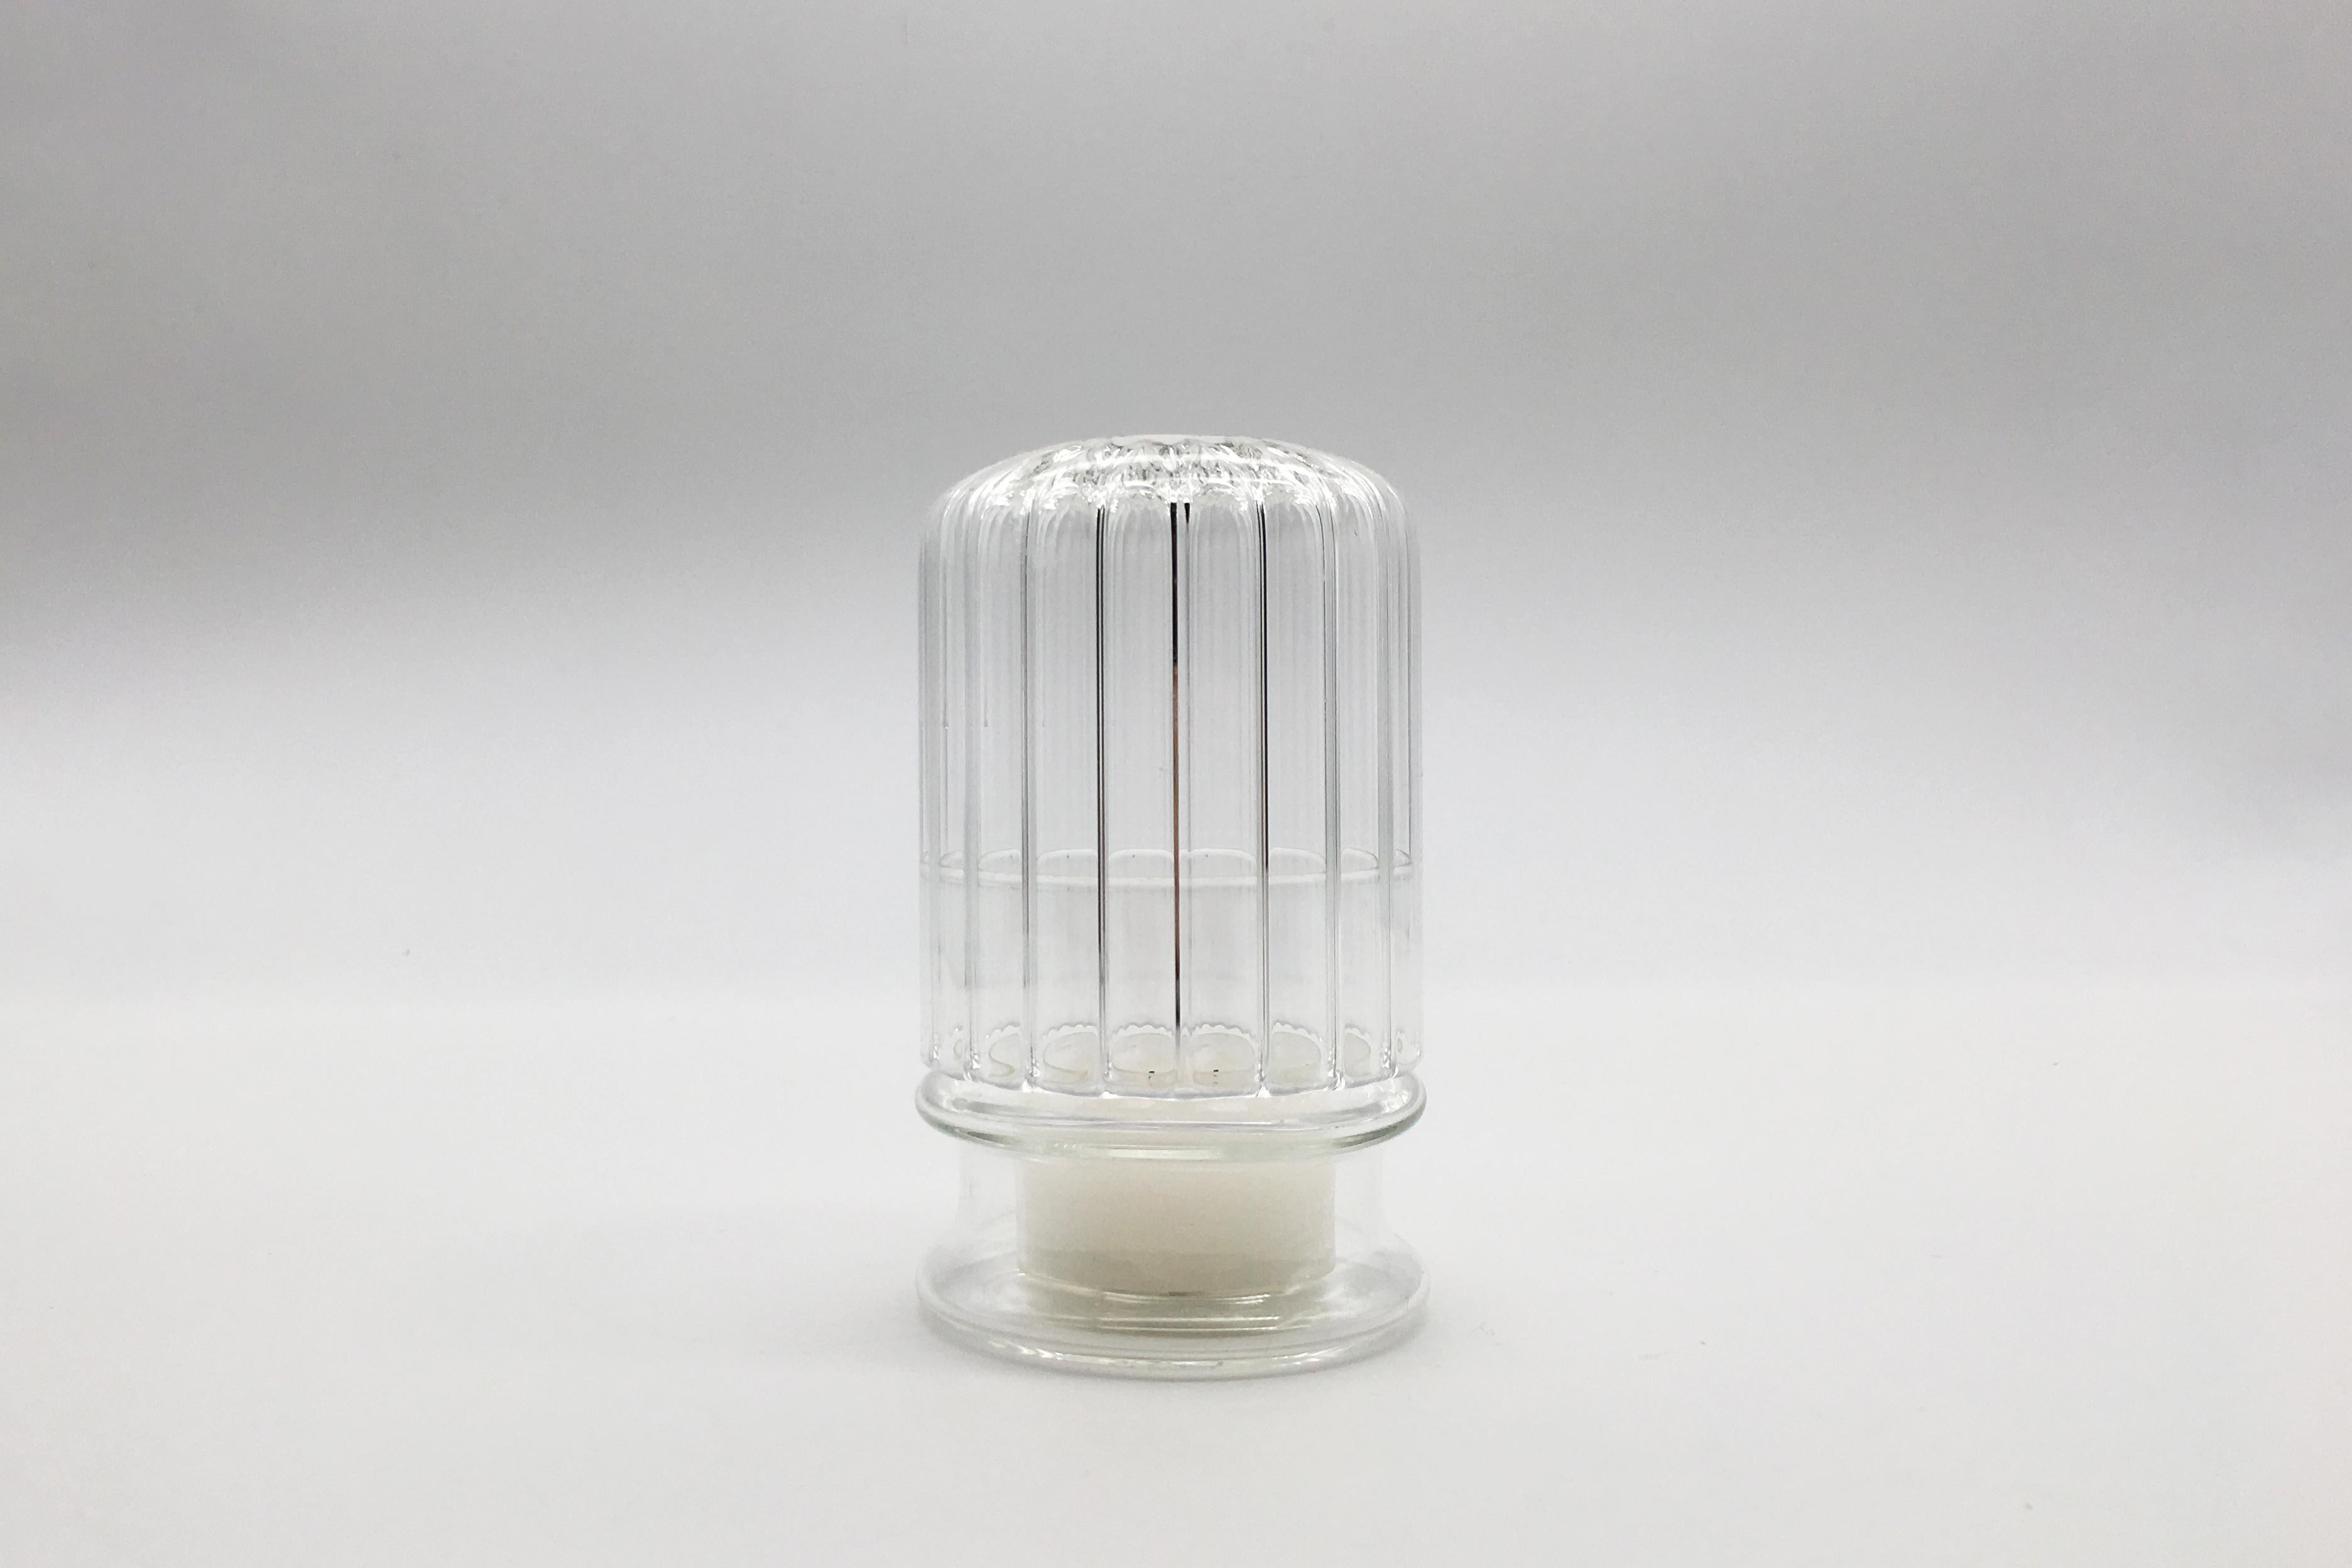 Moscardino is an elegant handmade candle holder made of borosilicate glass. The structure of this decorative element appears as a dome that protects and accommodates a small candle. The faint light given by the candle fire creates a romantic and